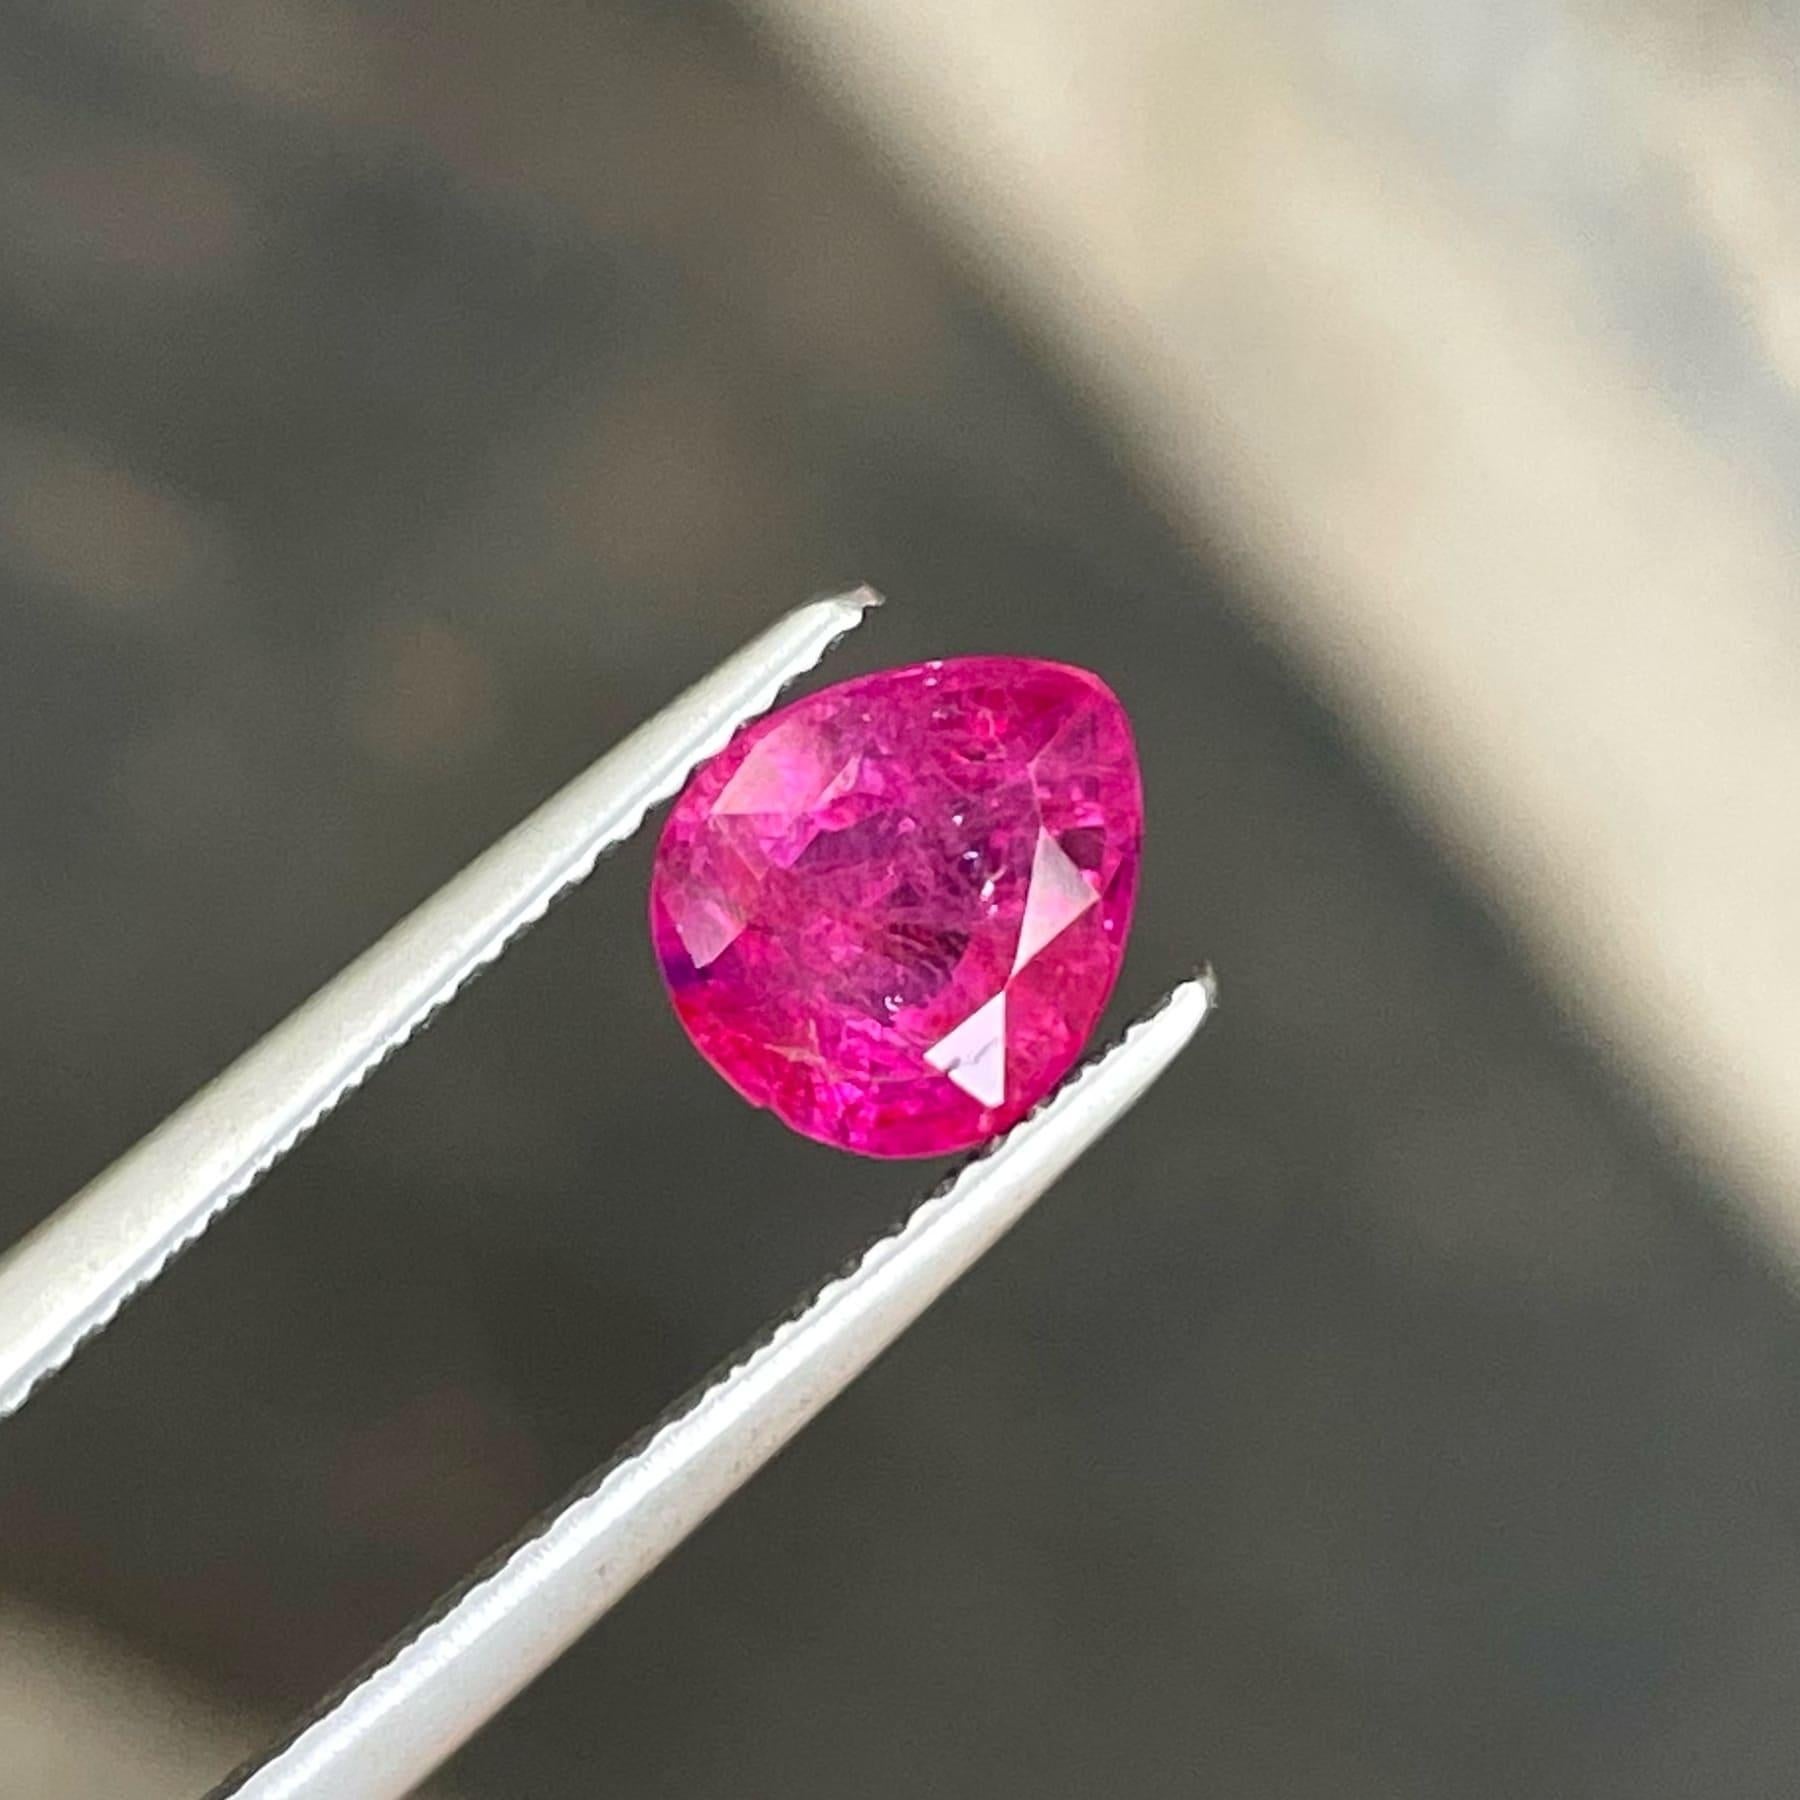 Pinkish Red Natural Afghan Ruby Stone, Available For Sale At Wholesale Price, Natural High-Quality Pear Shape, 1.25 Carats, Certified Loose Ruby From Afghanistan. Ruby Ring, Ruby Gemstone, Ruby Jewelry

Pinkish Red Natural Afghan Ruby Stone